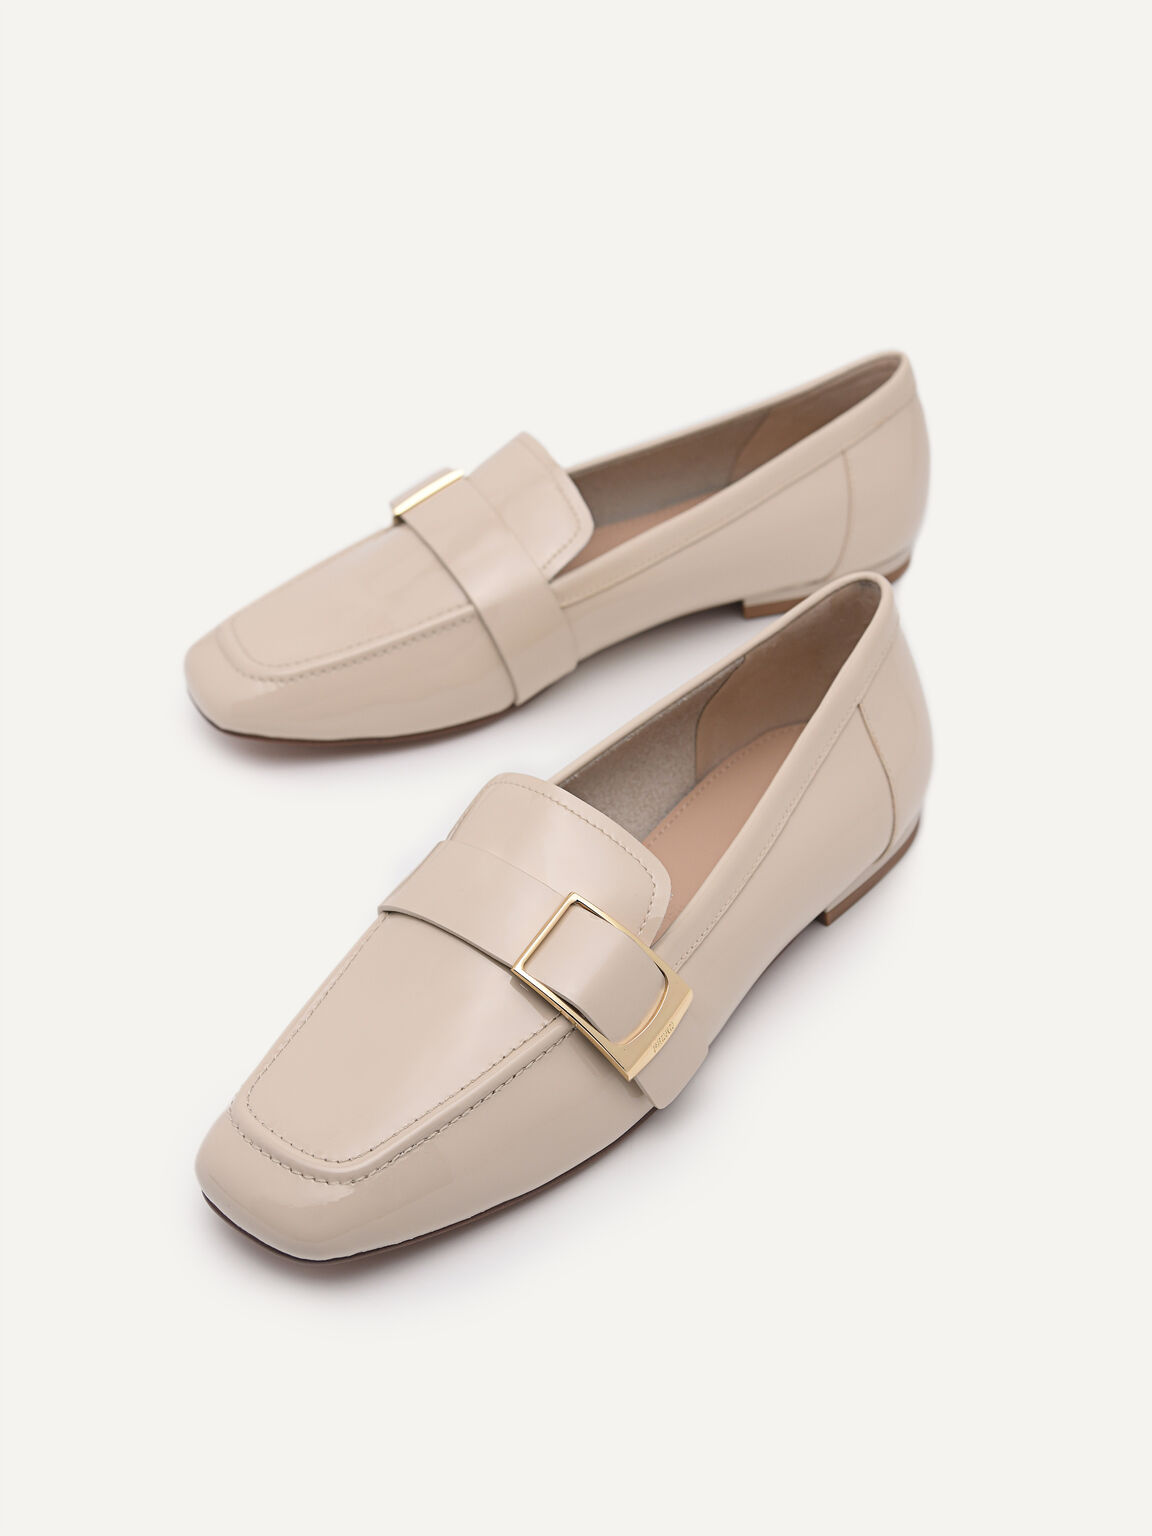 Patent Leather Loafers, Nude, hi-res